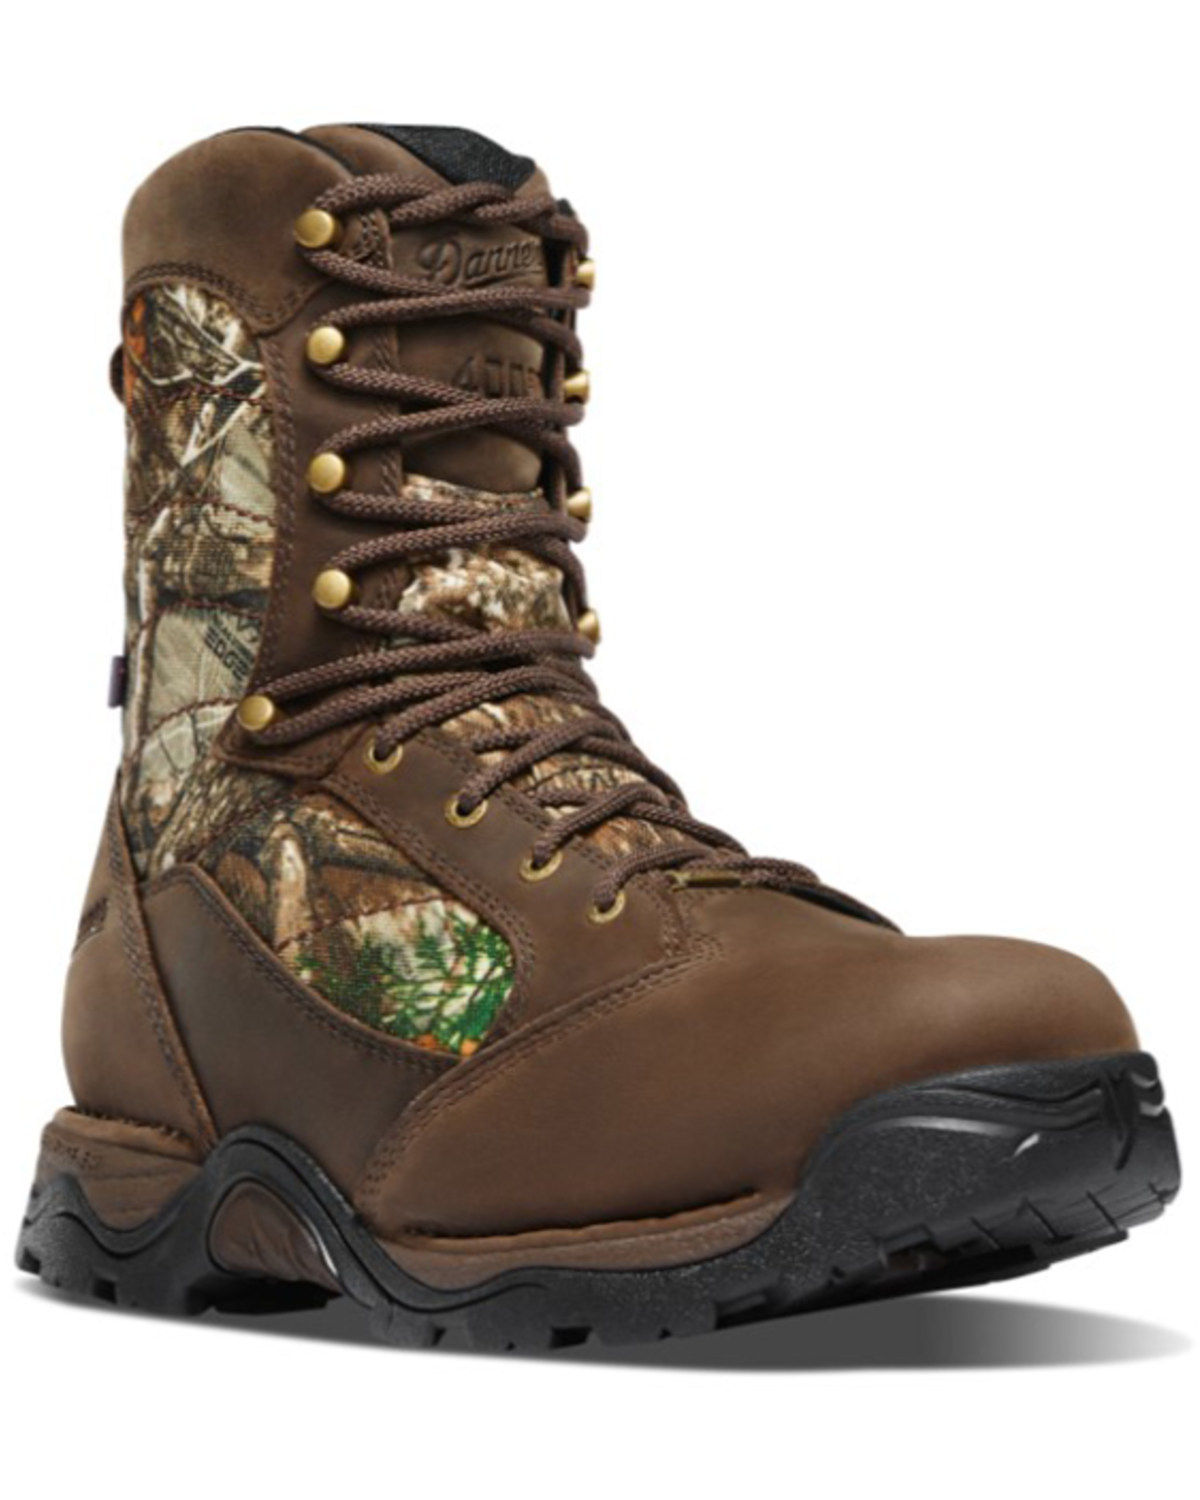 Danner Men's 8" Pronghorn RealTree Edge 400G Lace-Up Boots - Round Toe